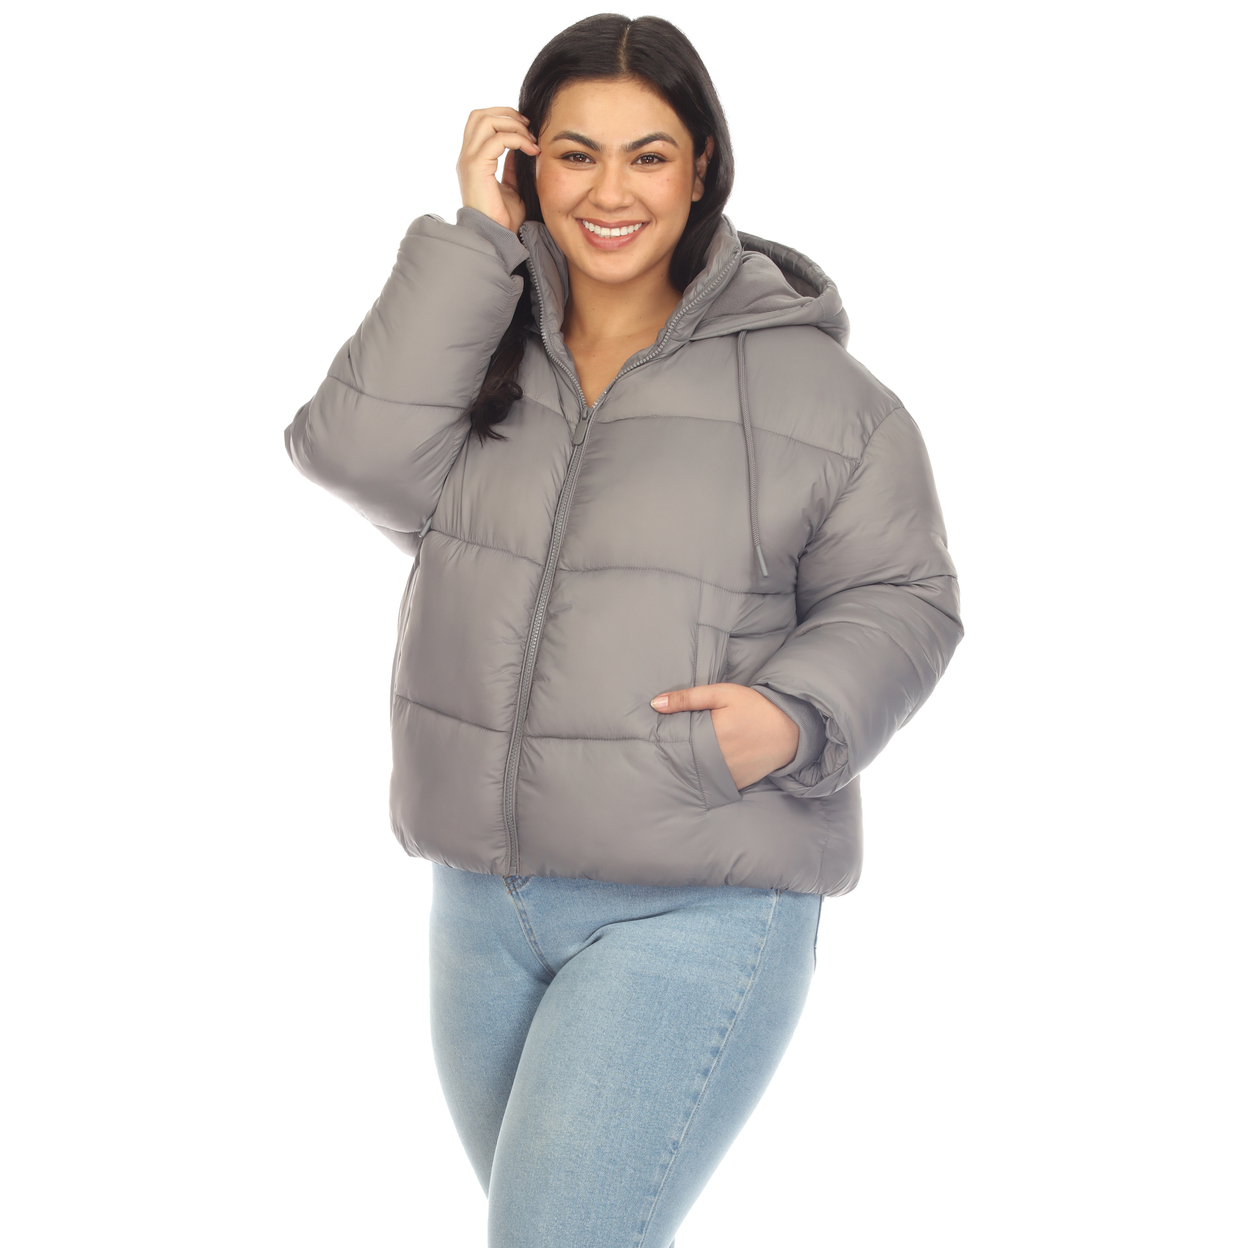 White Mark Women's Zip Hooded Puffer Jacket With Pockets - Gray, 3x